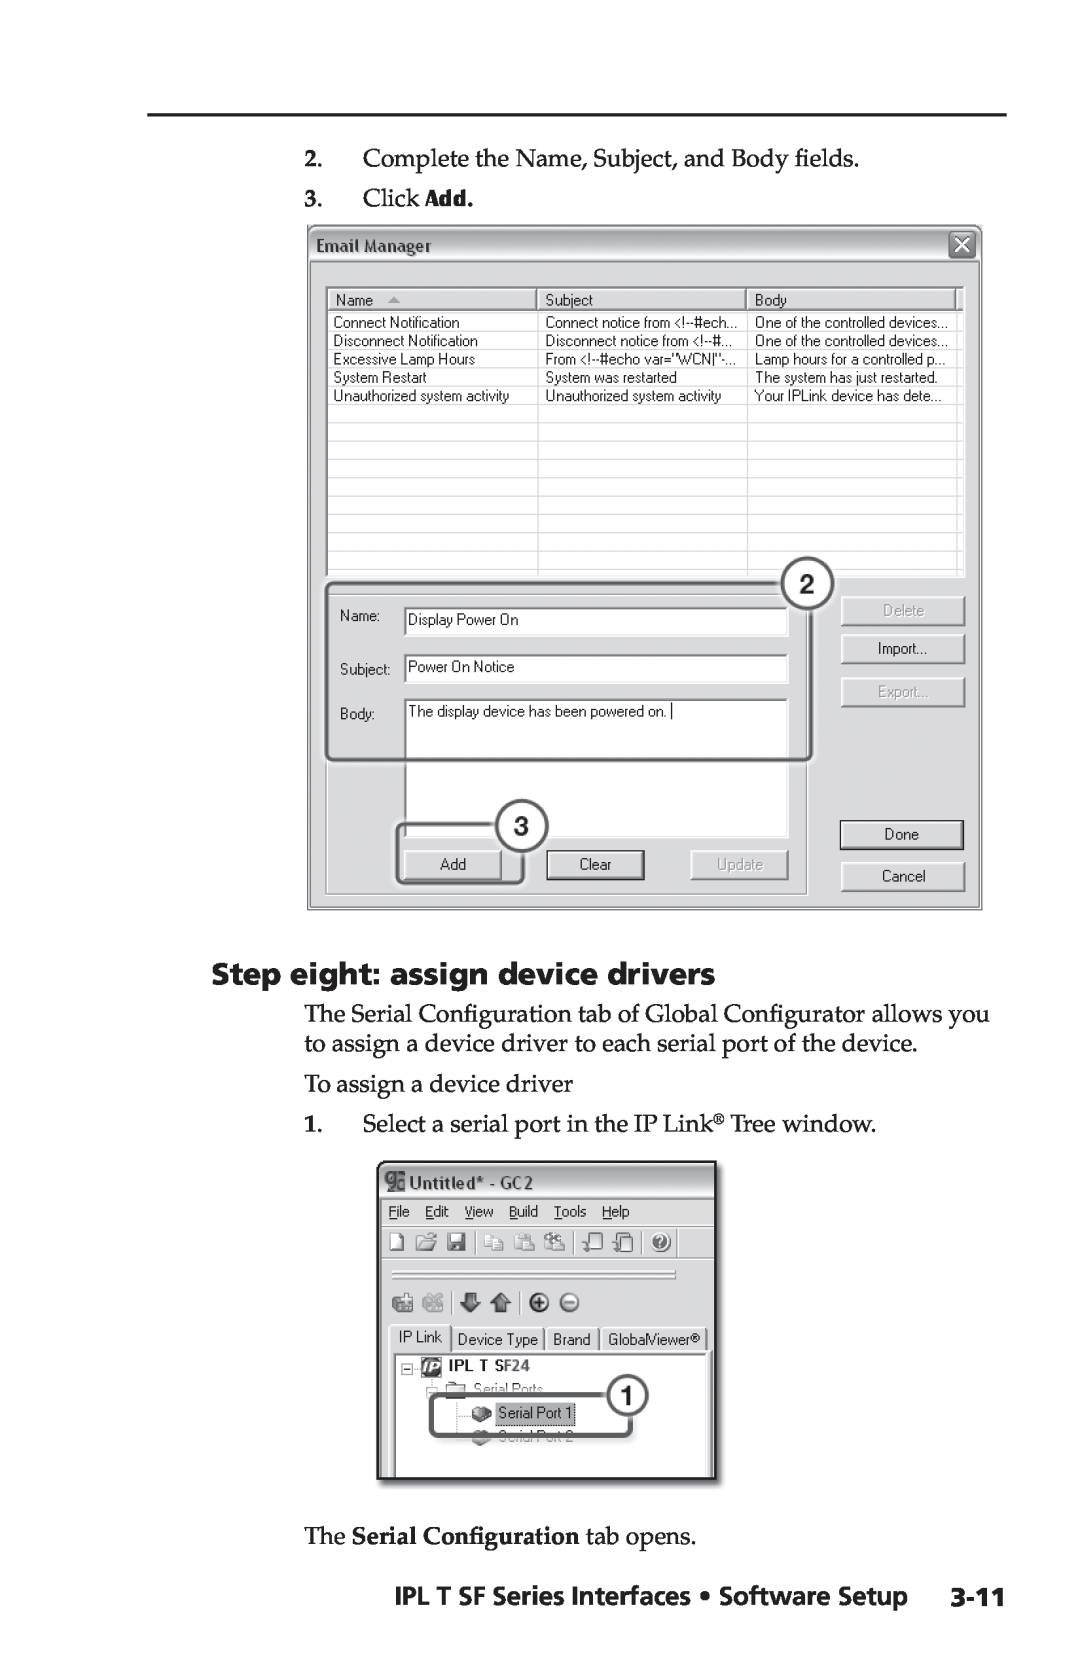 Extron electronic setup guide Step eight assign device drivers, IPL T SF Series Interfaces Software Setup 